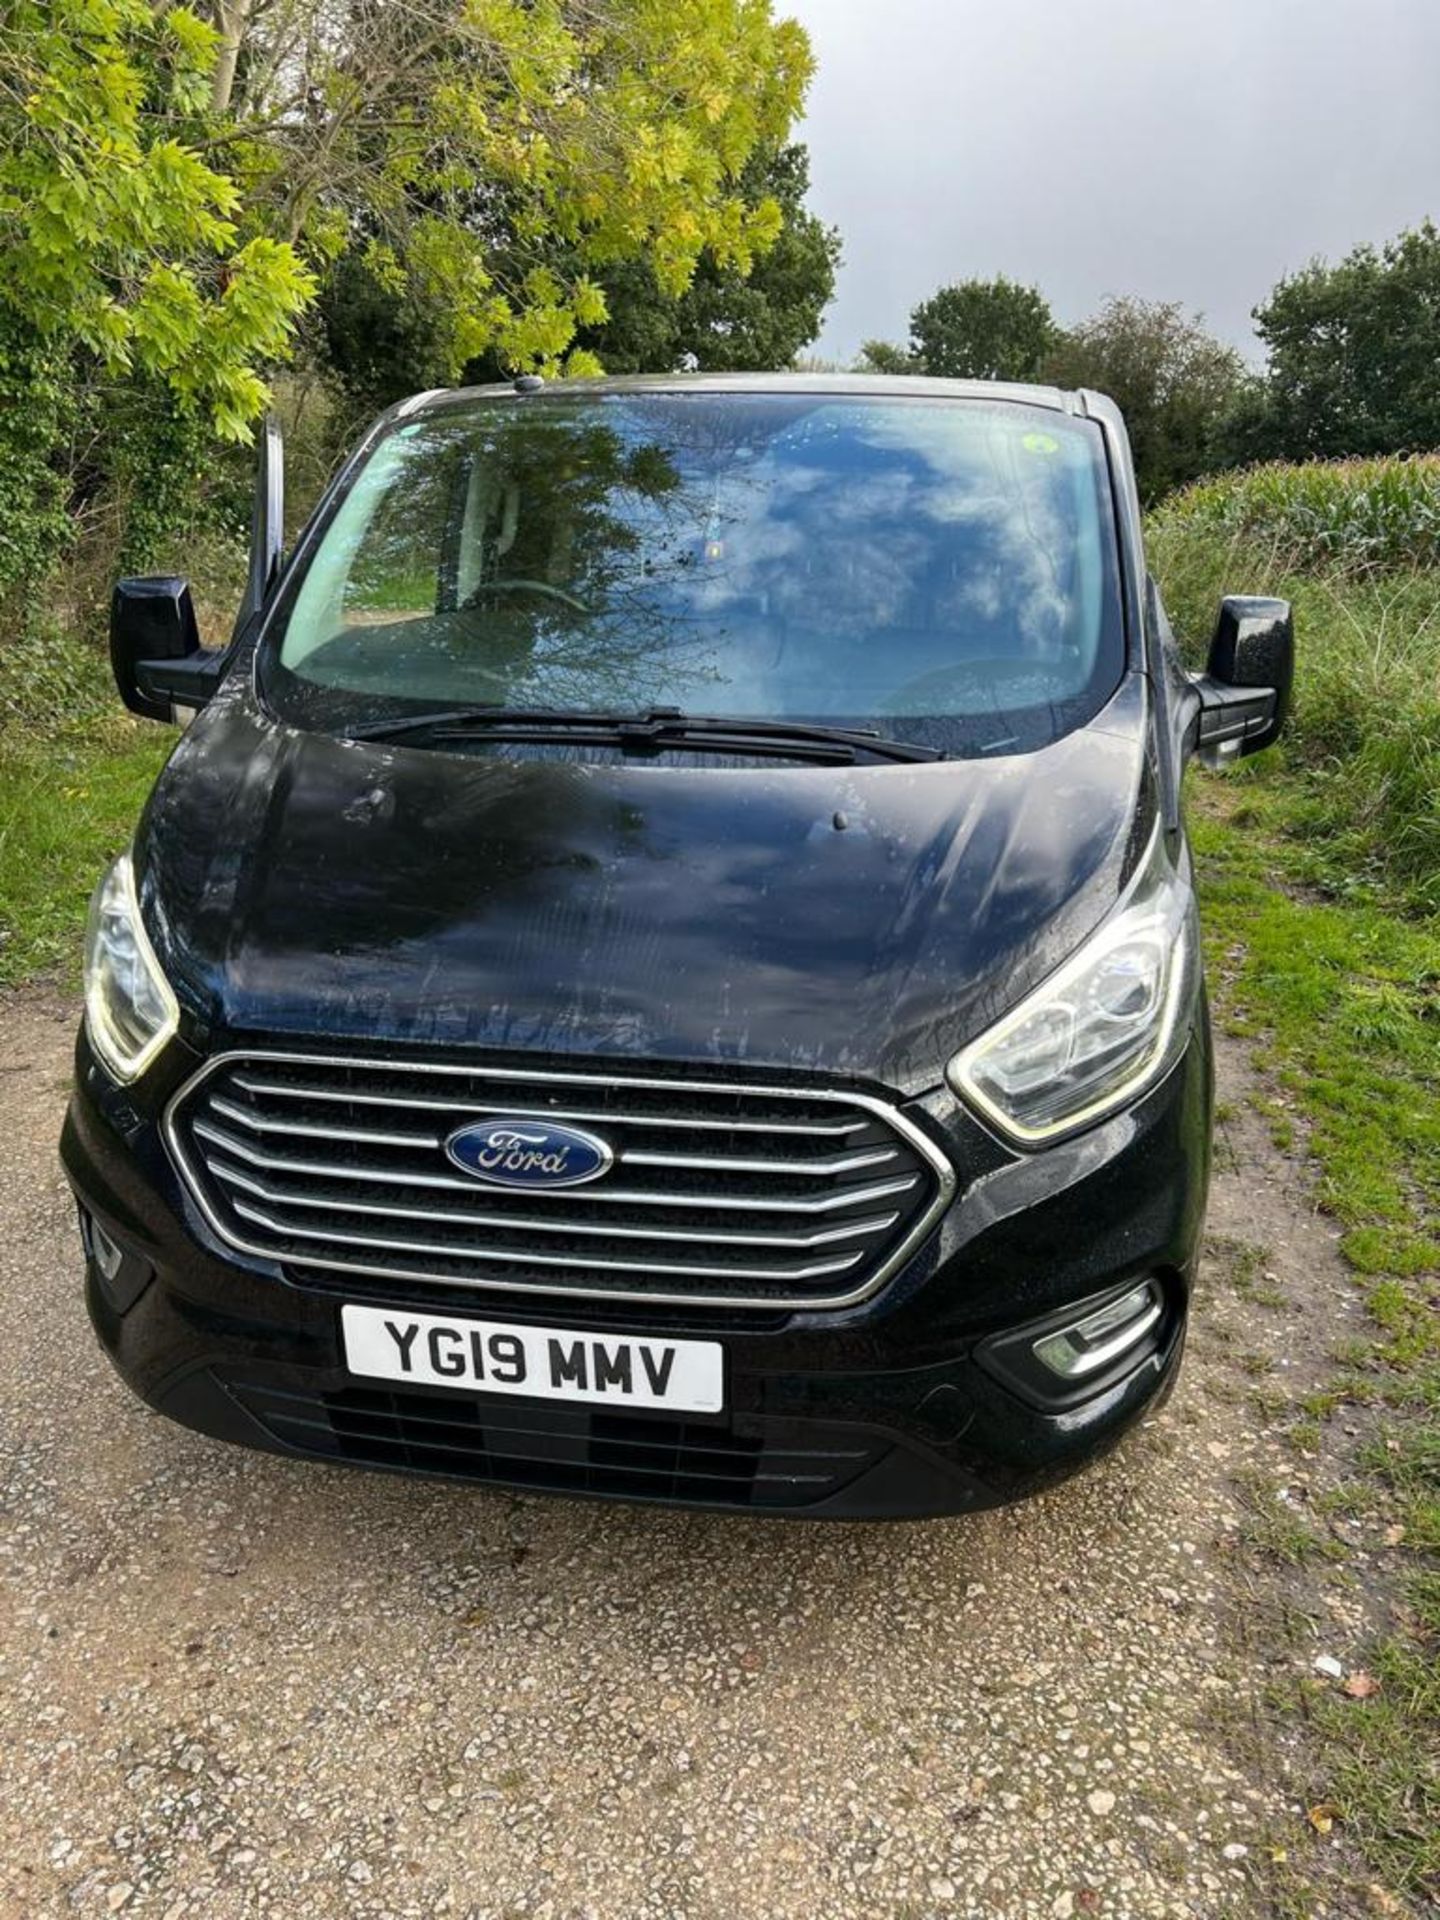 2019 FORD INDEPENDENCE RS AUTO BLACK WAV TOURNEO *NO VAT* - Image 3 of 50